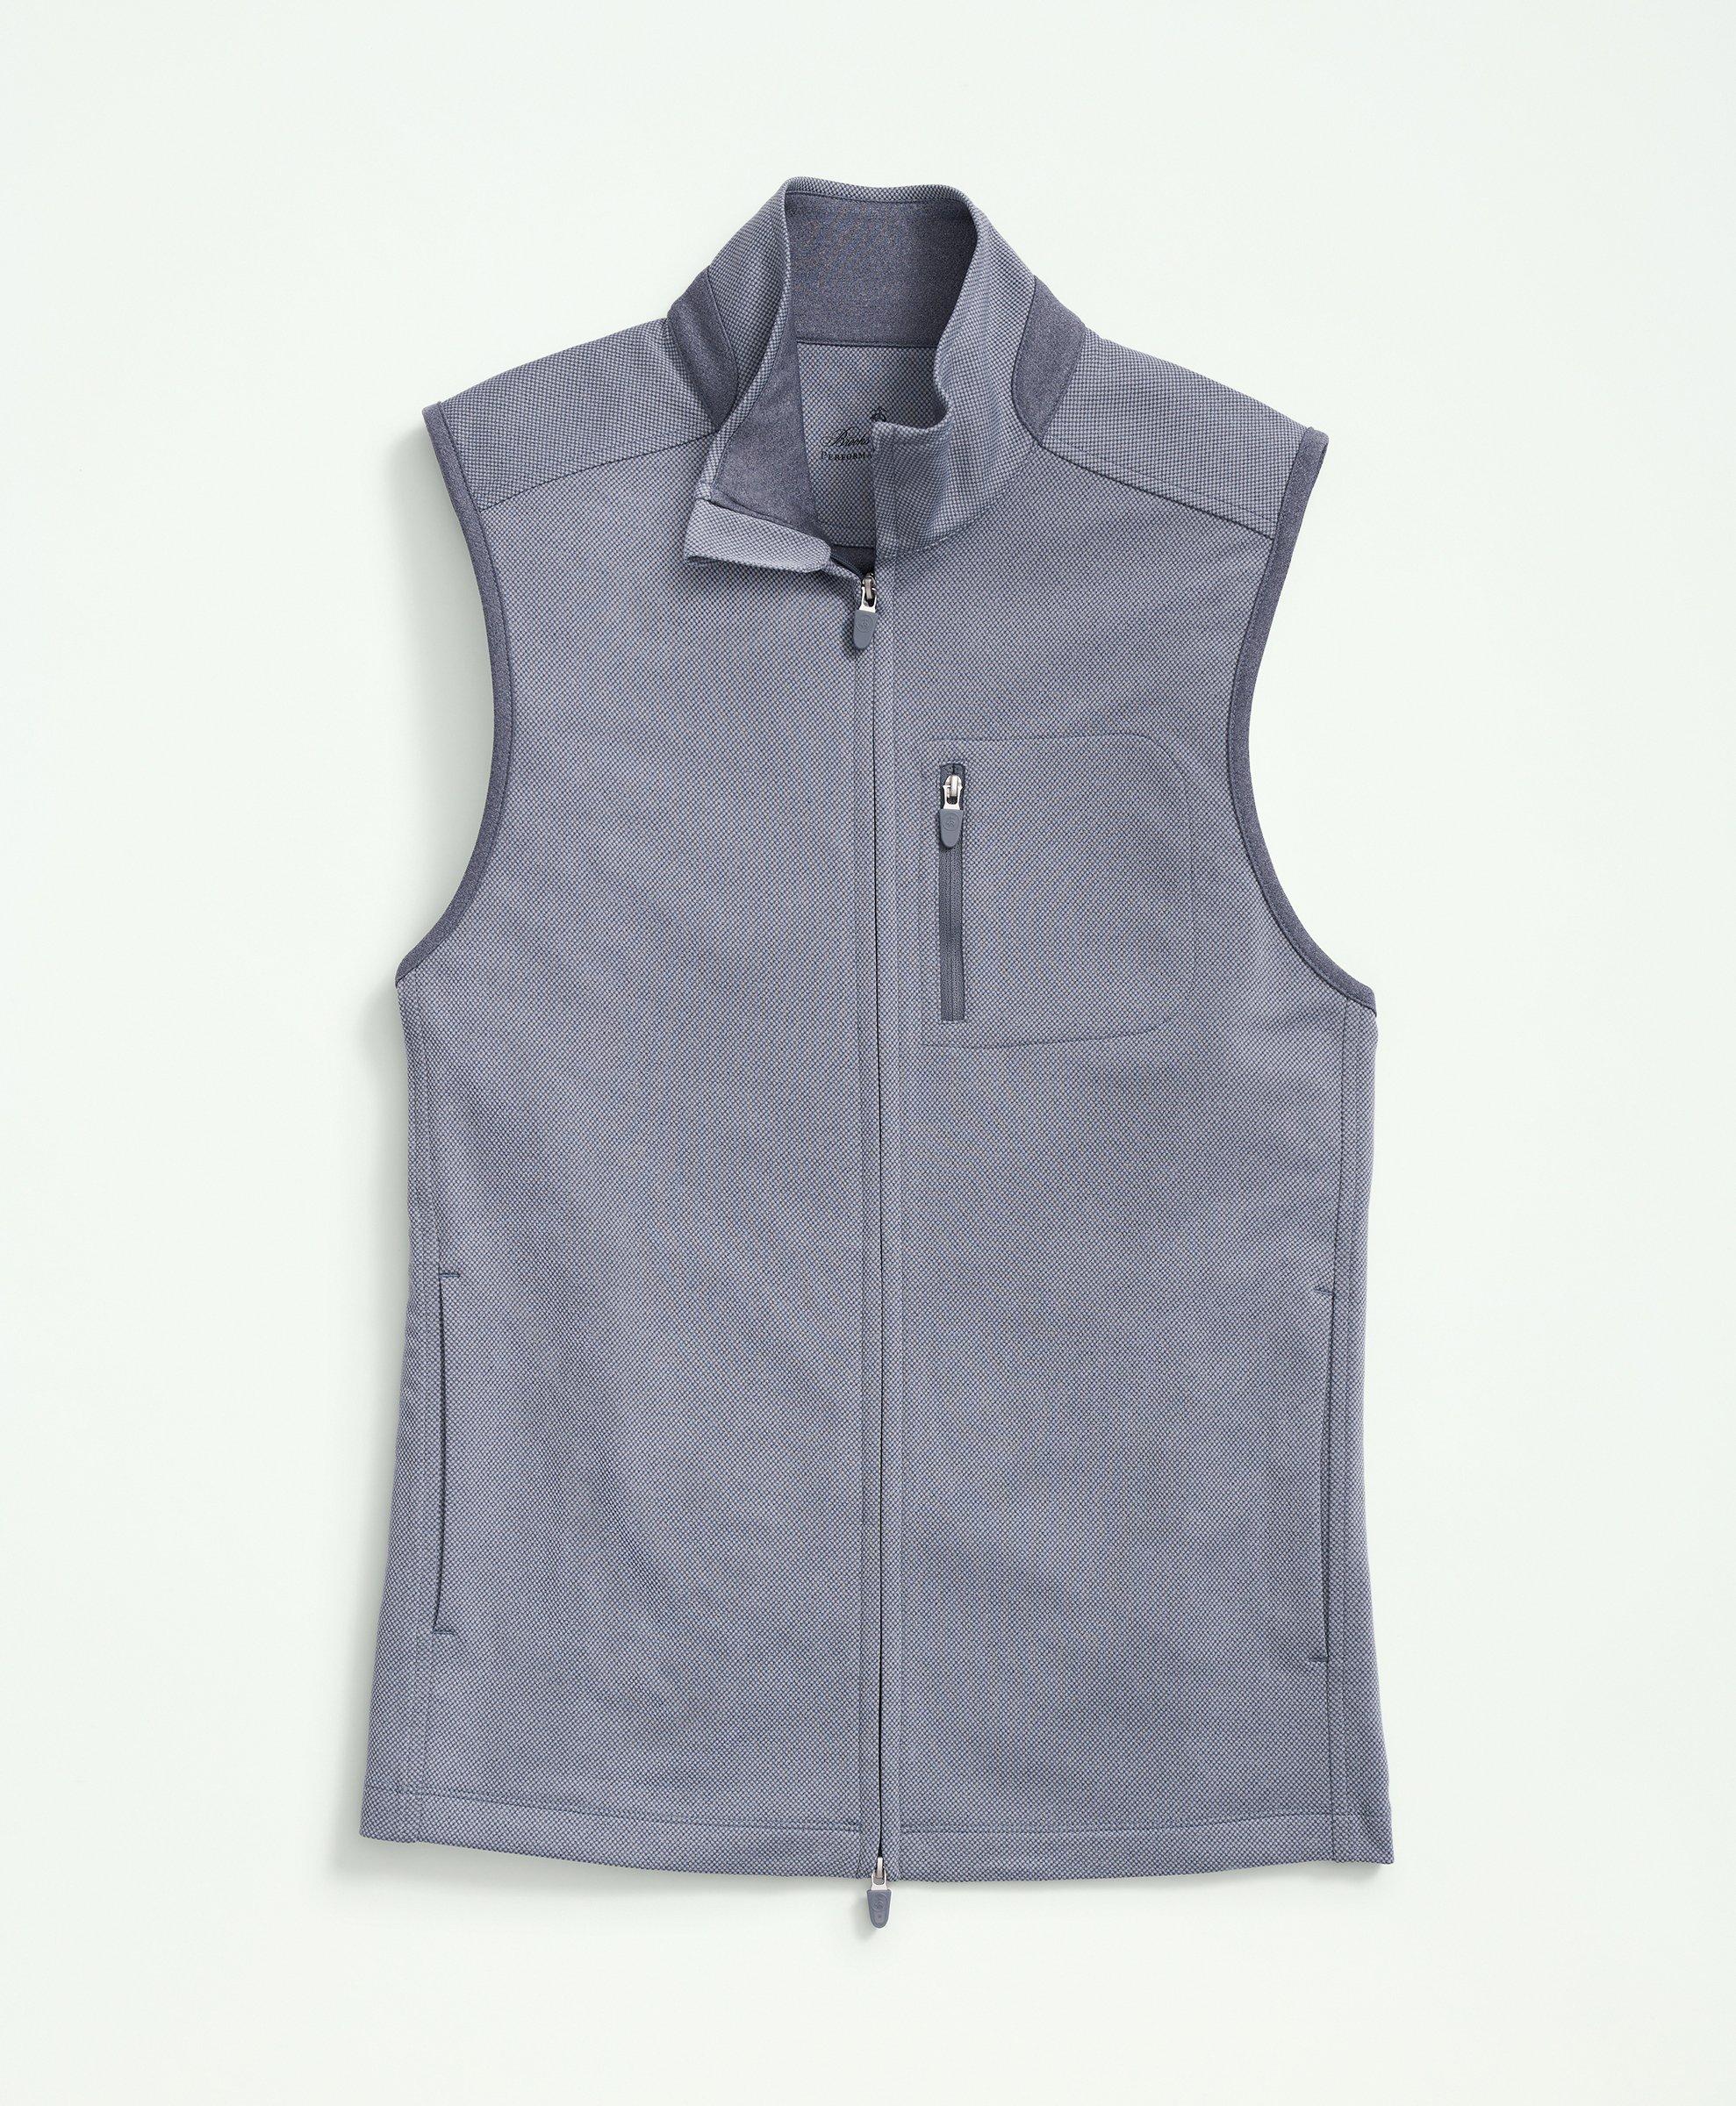 Shop Brooks Brothers Performance Series Full-zip Pique Vest | Blue | Size Small